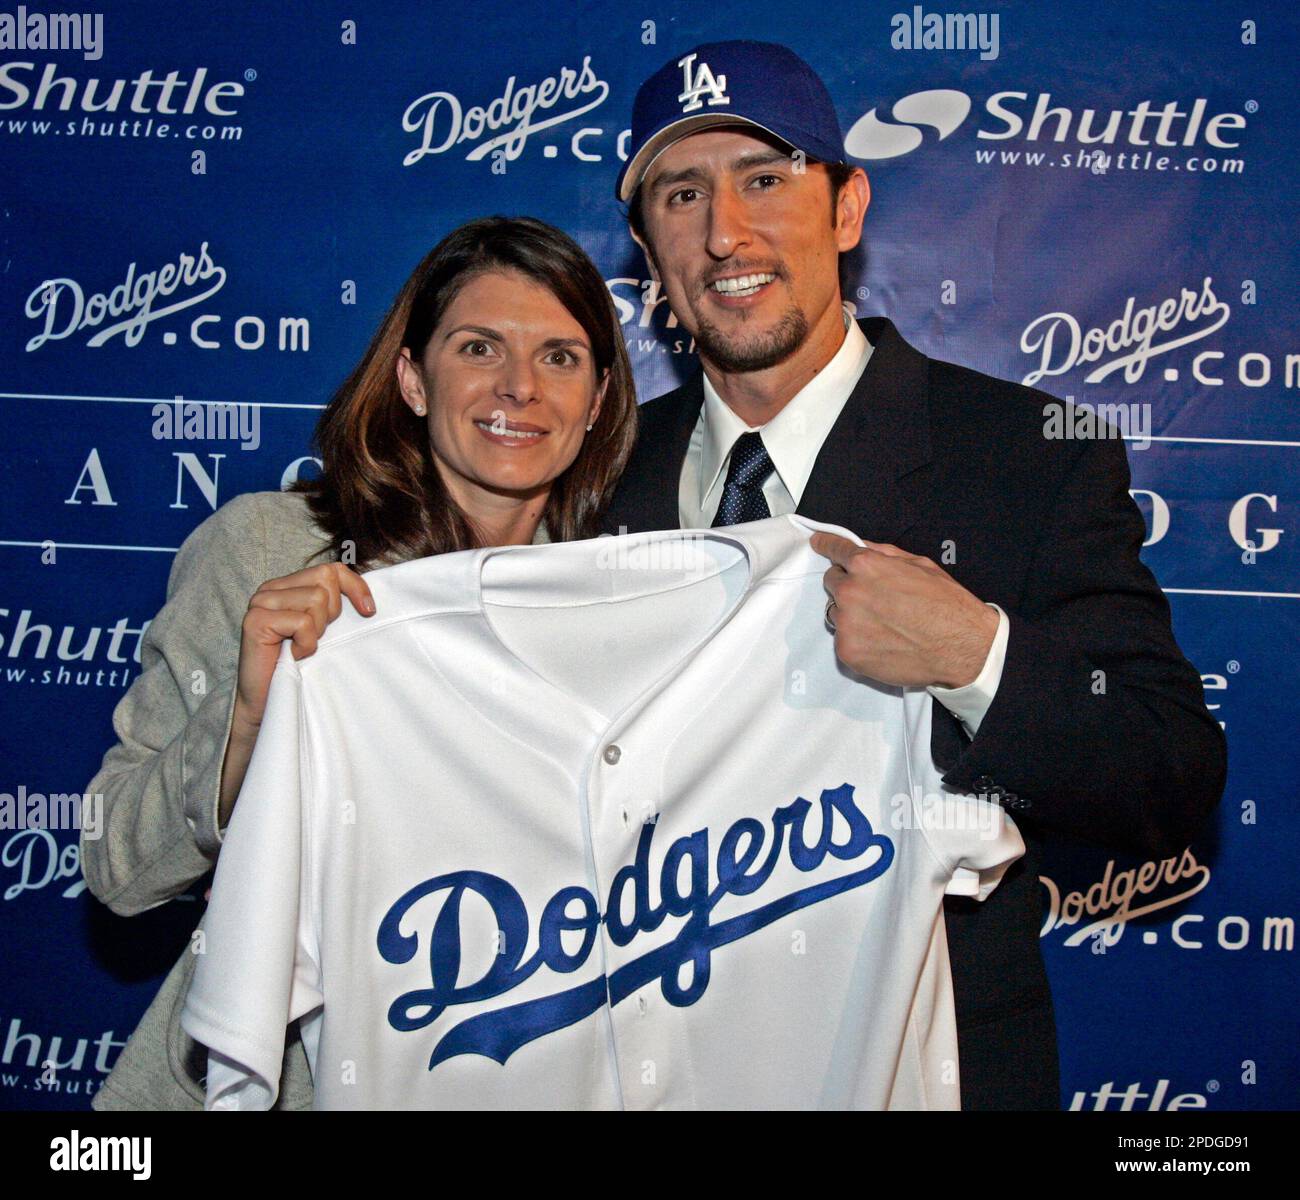 Five-time All-Star Nomar Garciaparra, right, holds his new Los